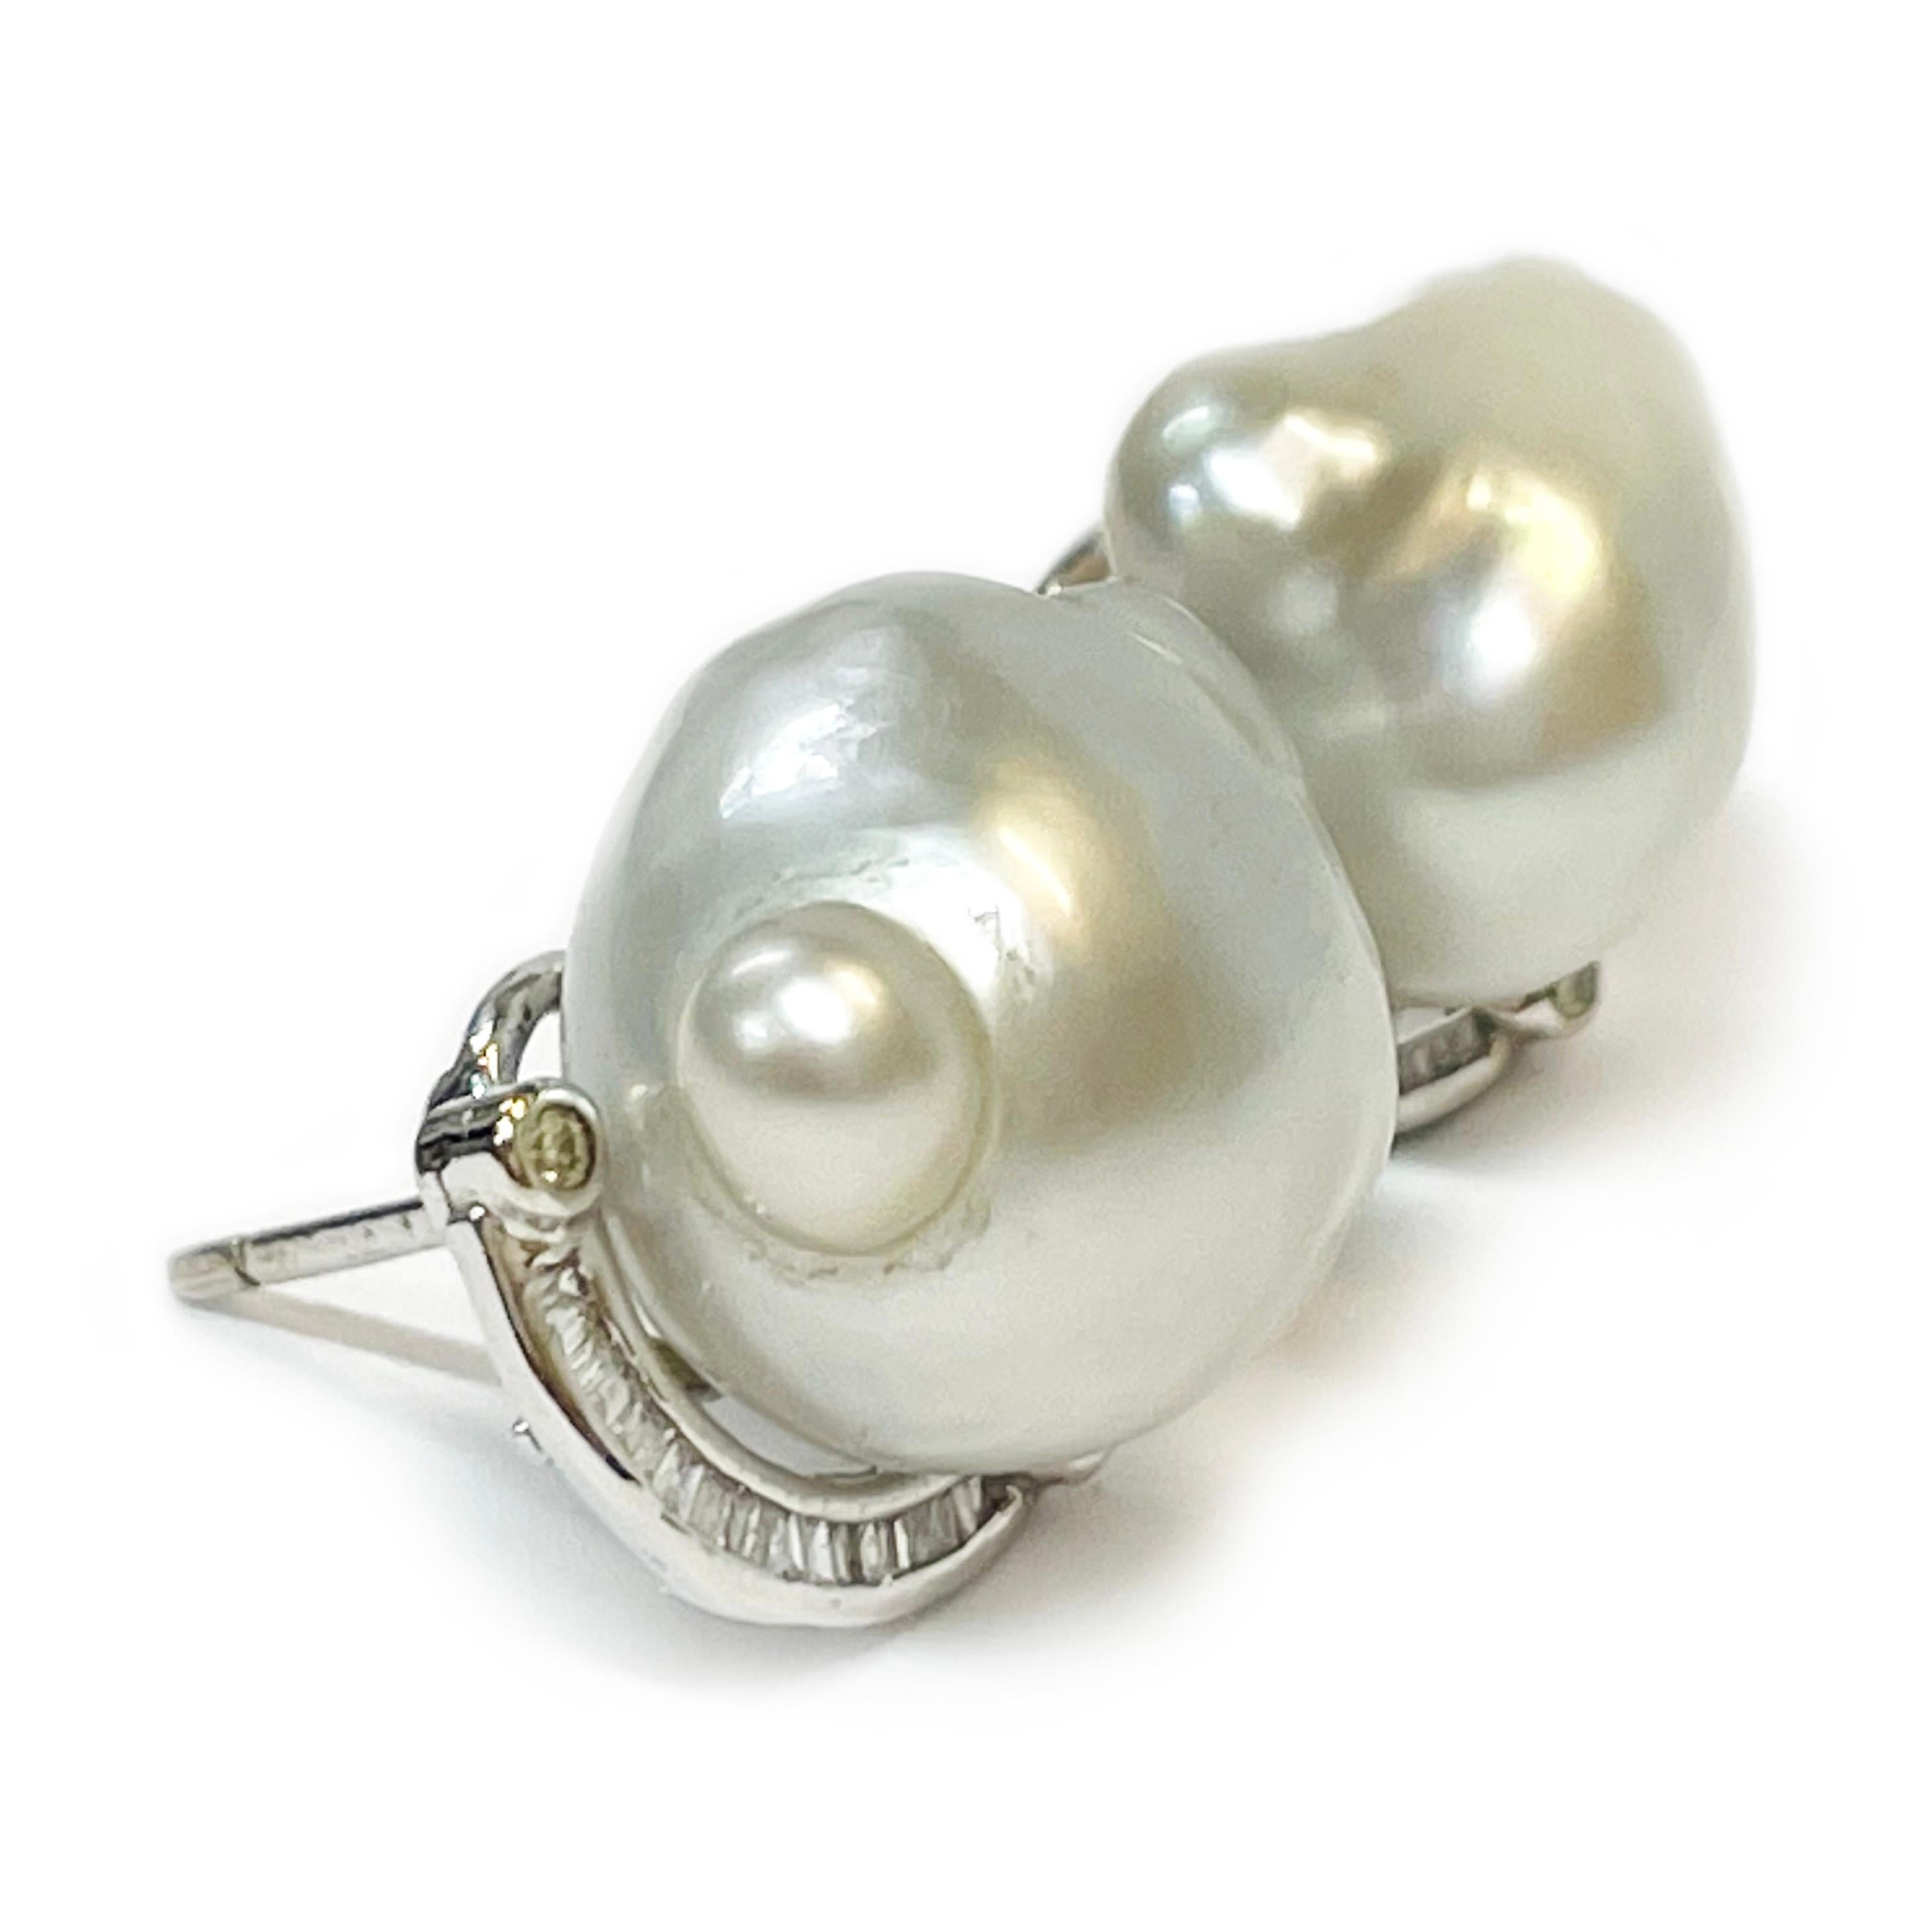 14 Karat White Gold South Sea Baroque Pearl Diamond Earrings. Each earring features a South Sea Baroque pearl and a semi-curve of channel-set baguettes and four bezel-set round diamonds. The four round diamonds measure 1.5mm each/0.015ct for a total